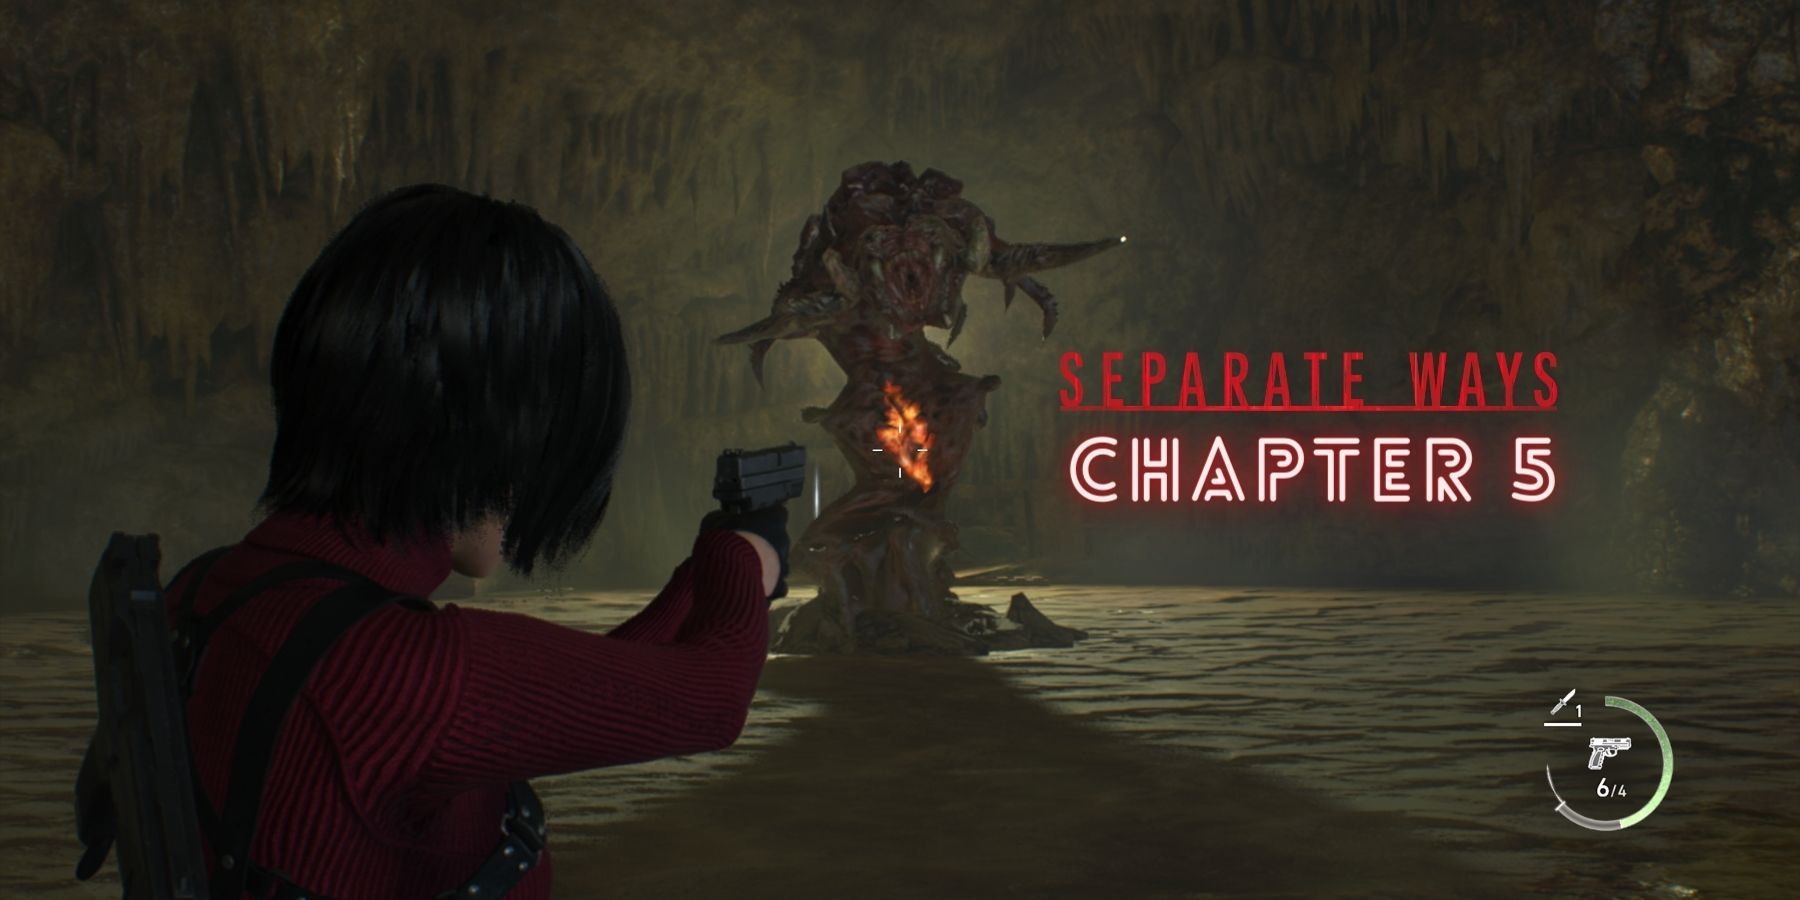 Resident Evil 4 Separate Ways DLC - PC Guide